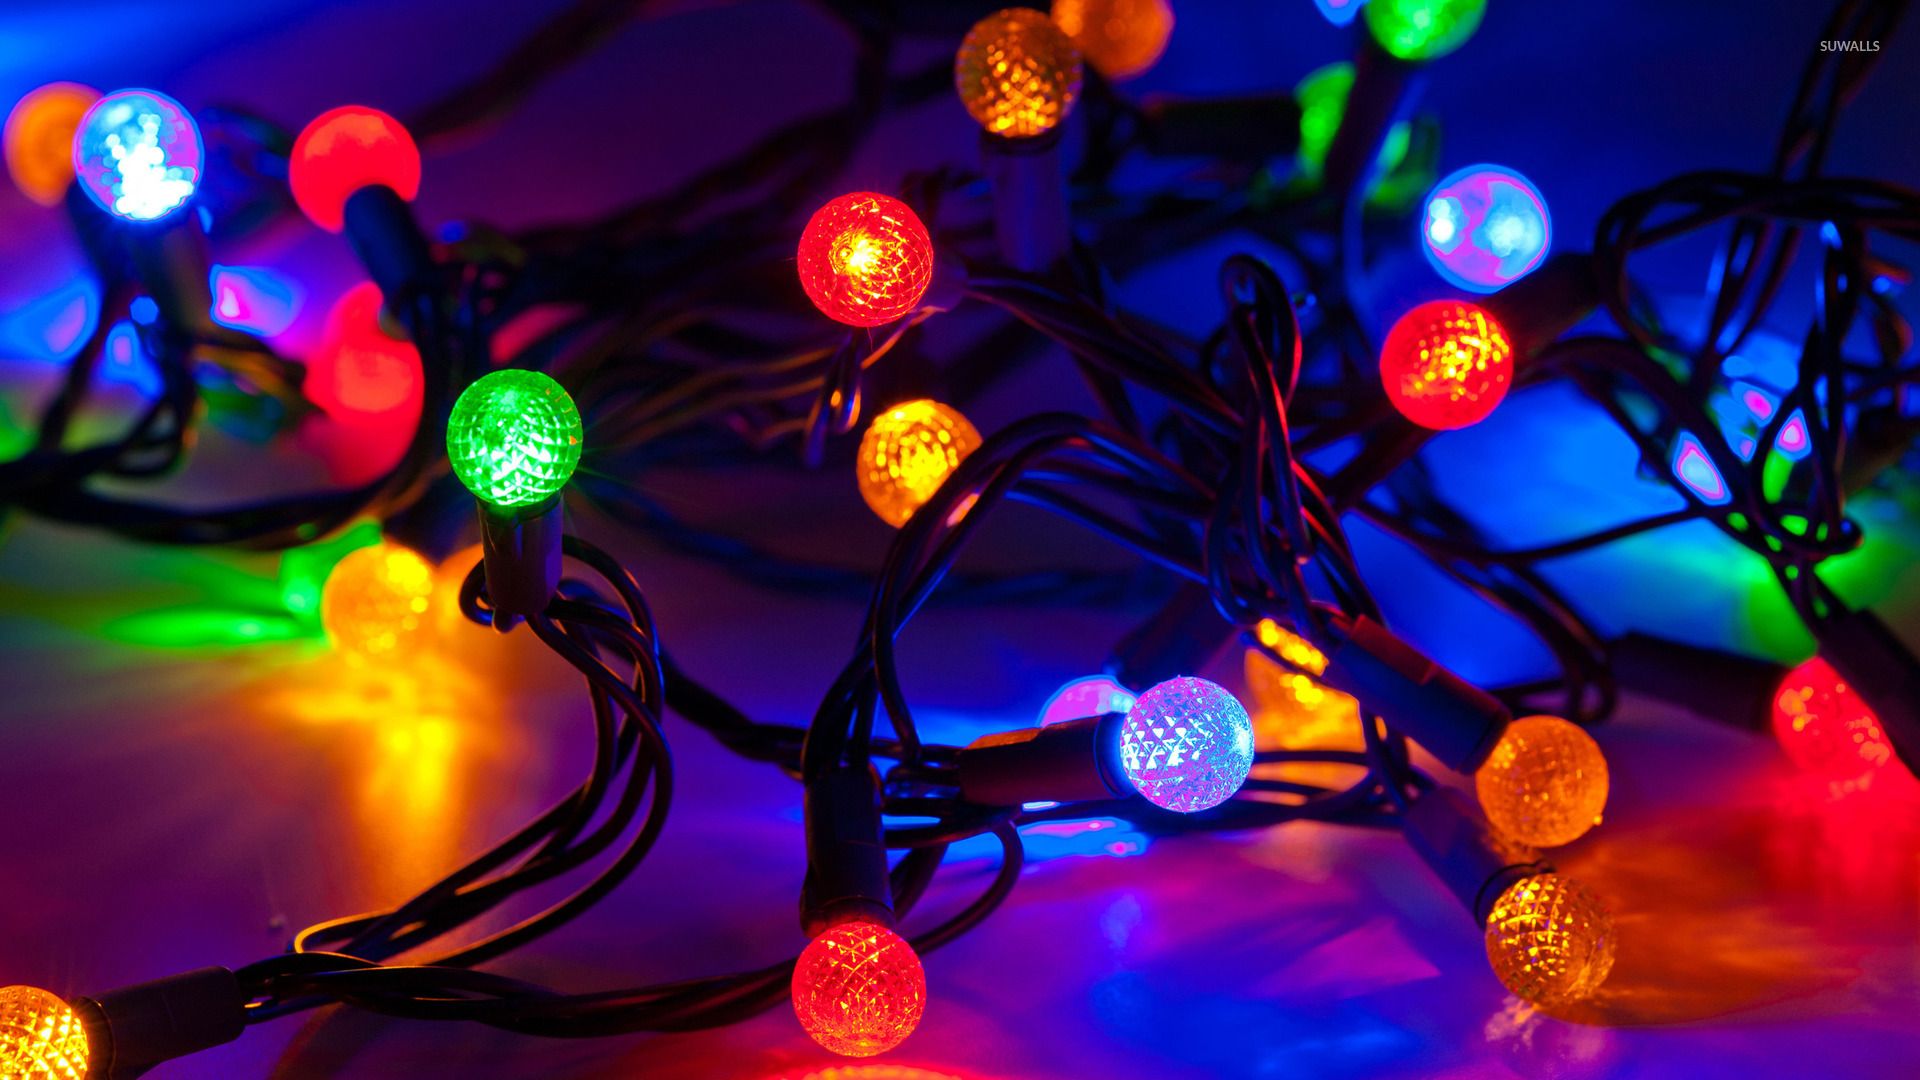 Free download Christmas lights wallpaper Photography wallpaper 22901 [1920x1080] for your Desktop, Mobile & Tablet. Explore Christmas Lights Wallpaper. Christmas Lights Background, Christmas Lights Wallpaper, Free Christmas Lights Wallpaper